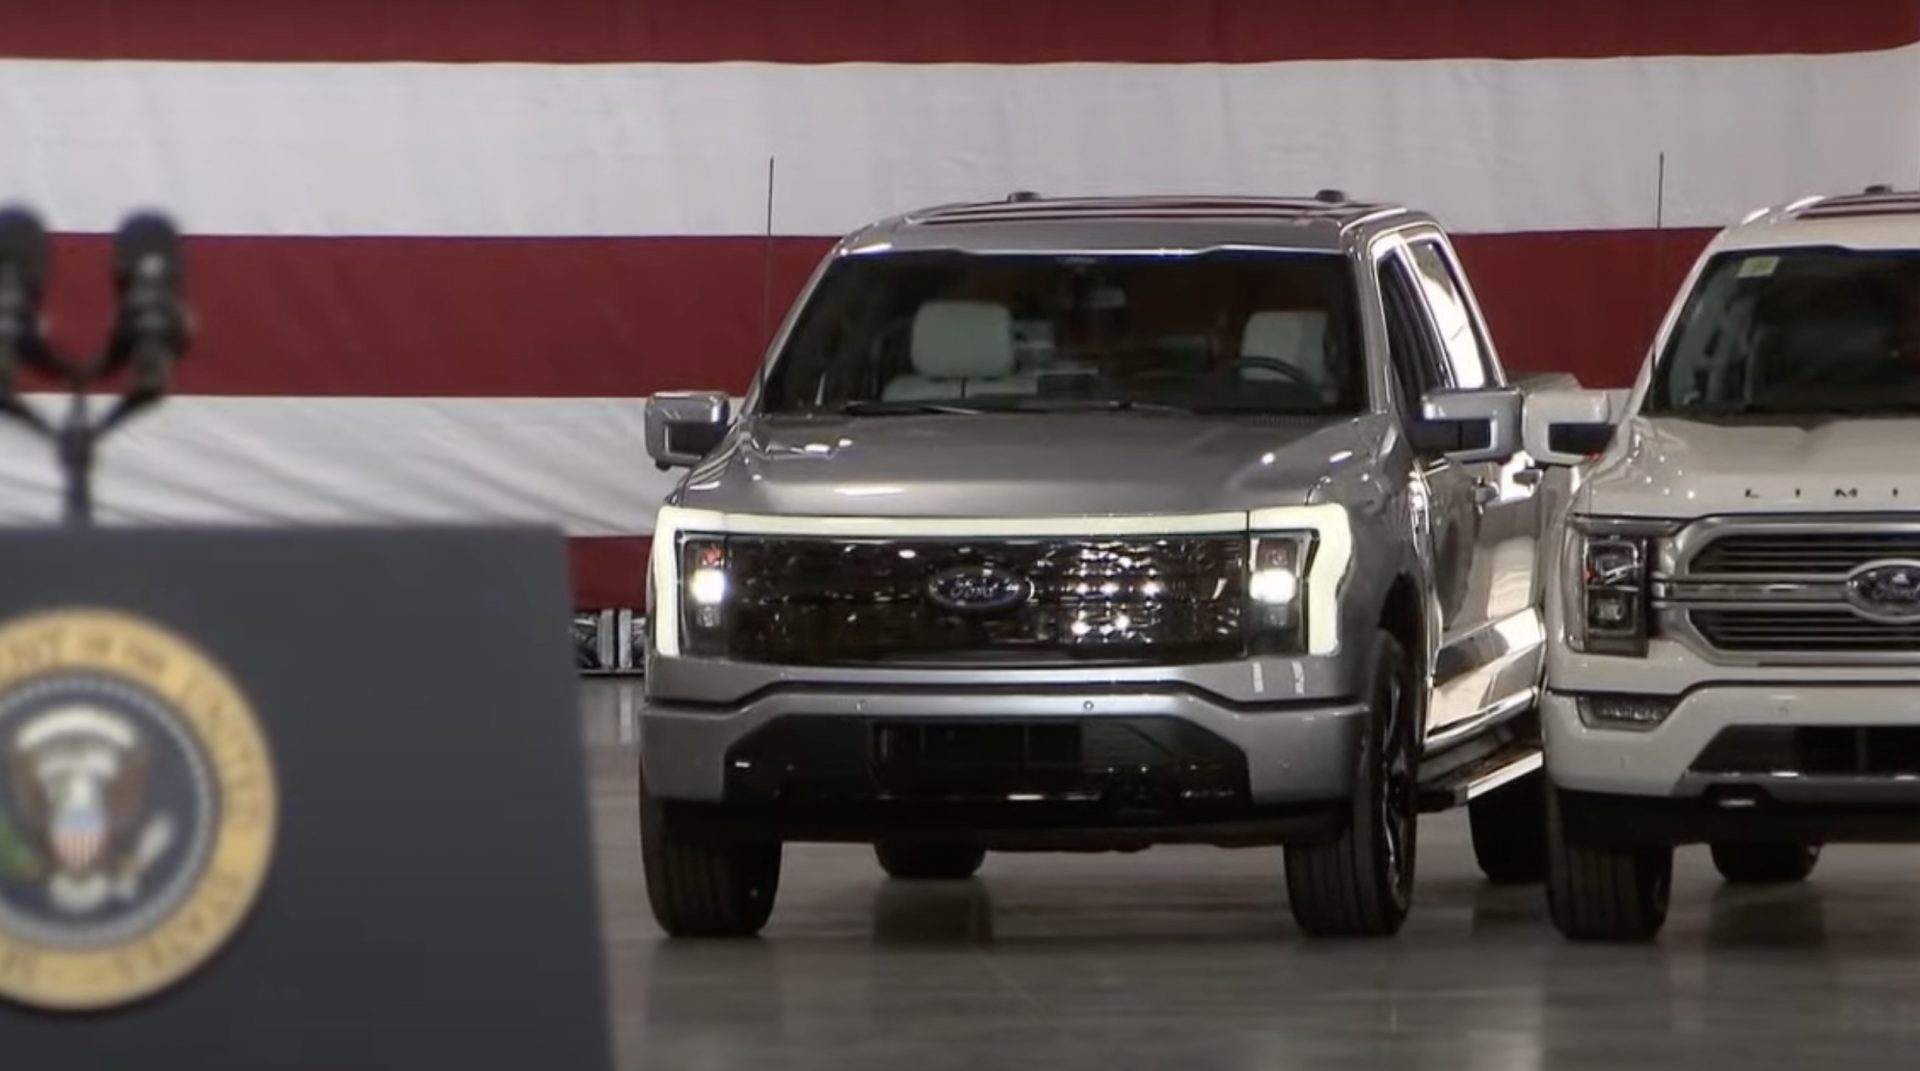 President Biden unearths Ford’s electrical F-150 a day early in manufacturing facility speech